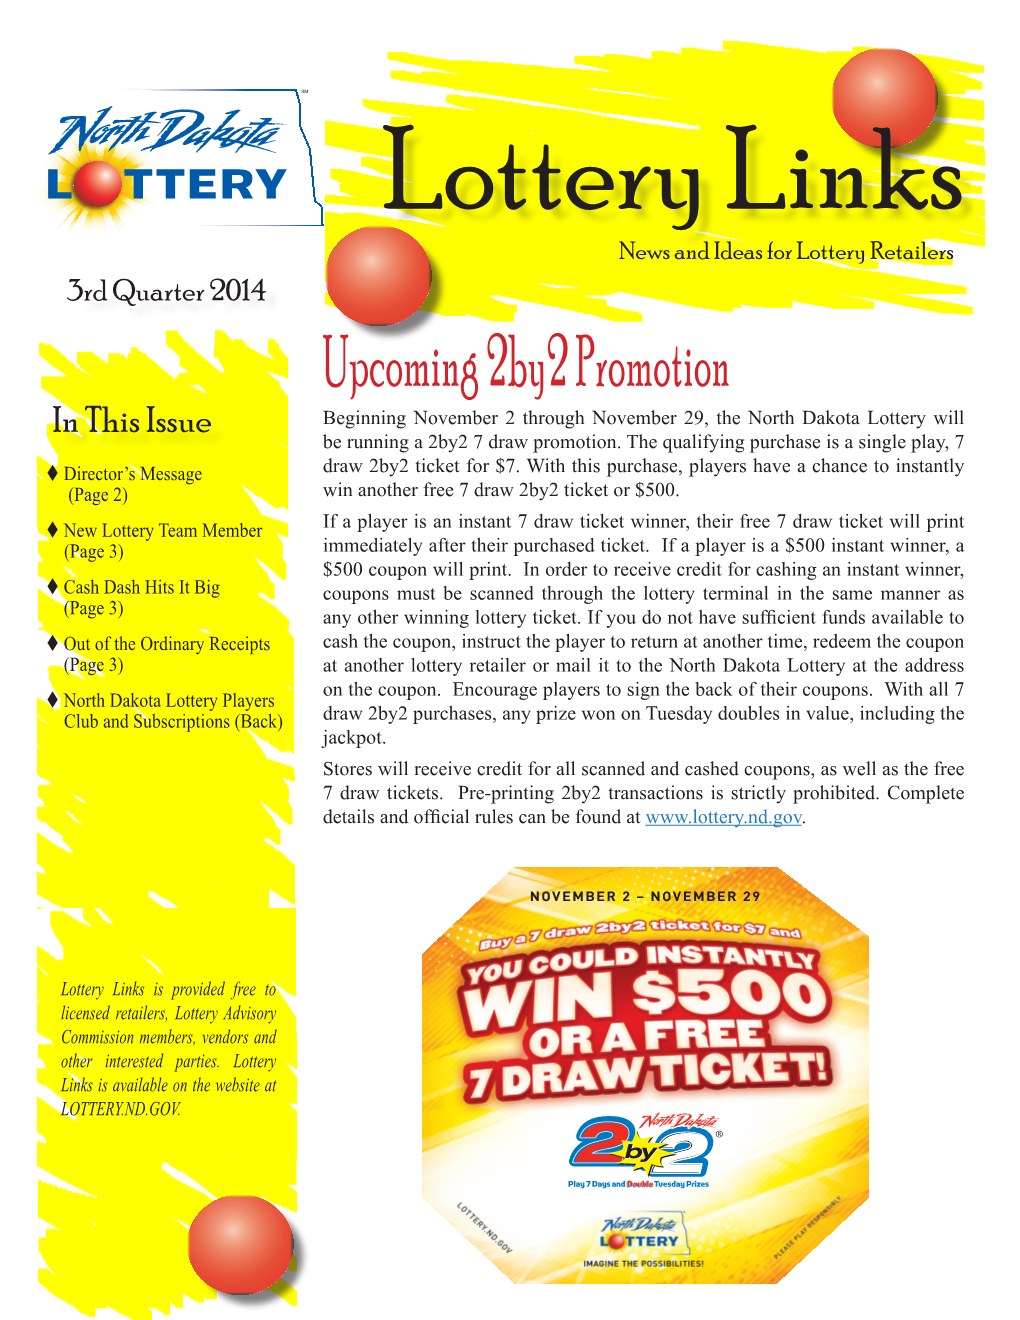 Upcoming 2By2 Promotion in This Issue Beginning November 2 Through November 29, the North Dakota Lottery Will Be Running a 2By2 7 Draw Promotion